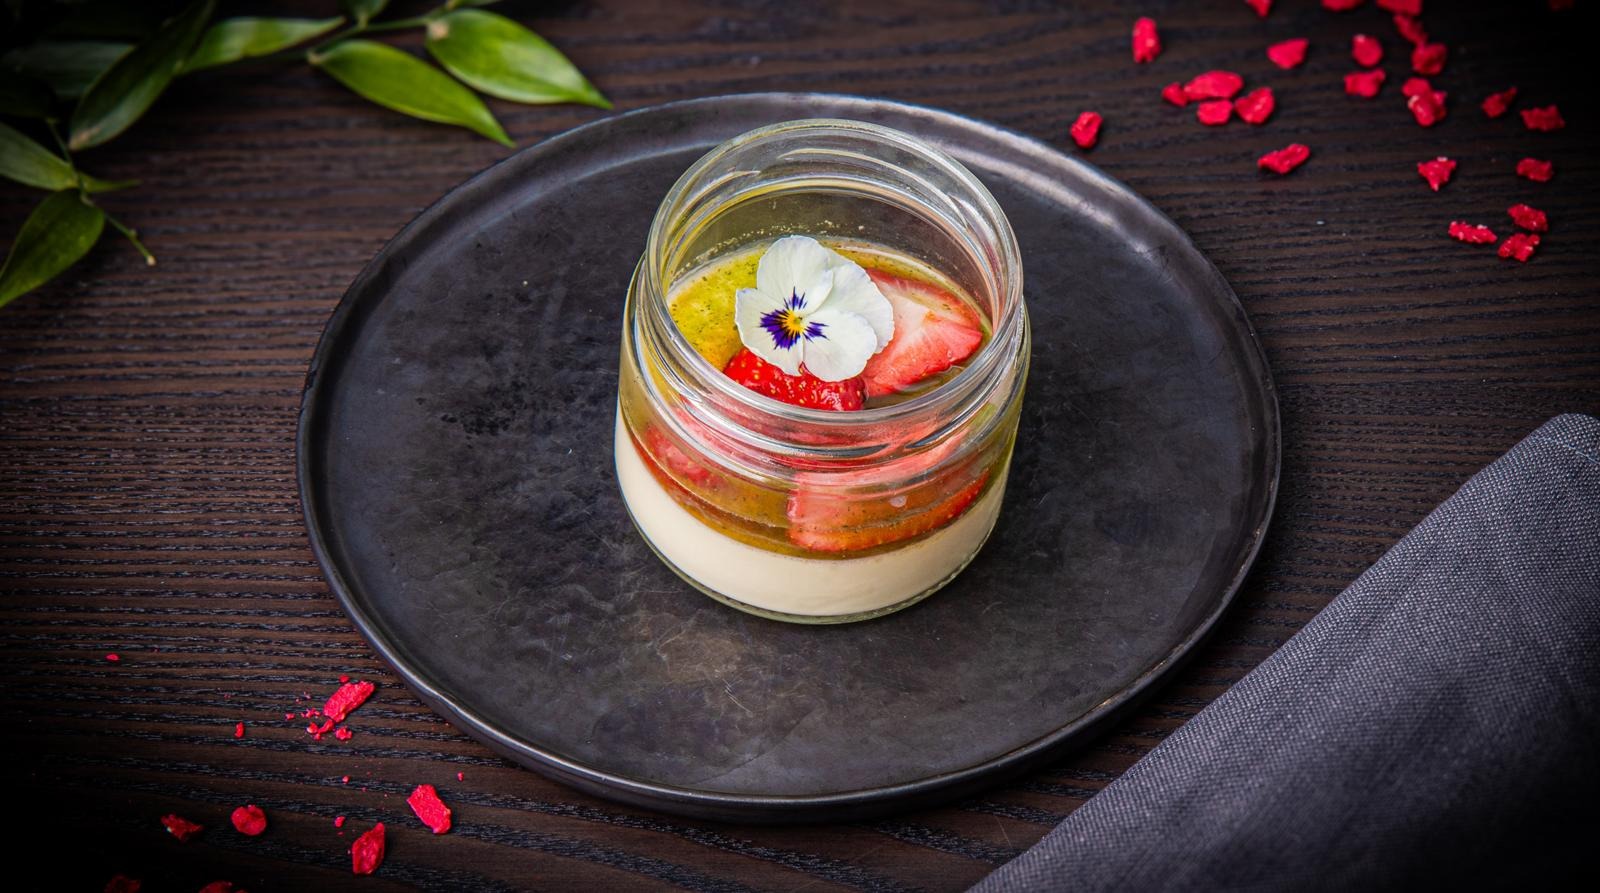 Lime and strawberry panna cotta